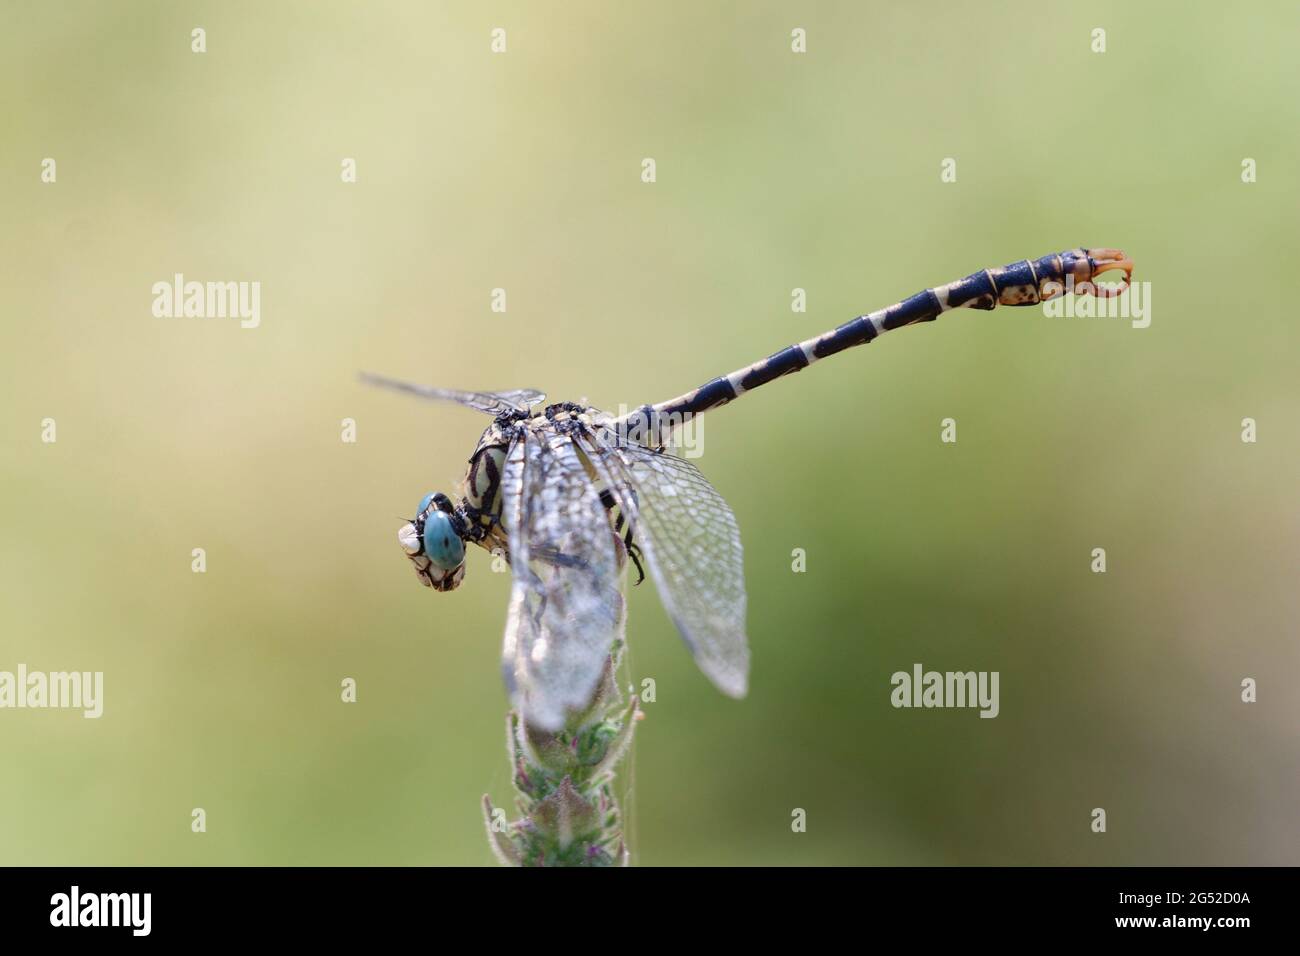 Blue Dragonfly High Resolution Stock Photography Images - Alamy